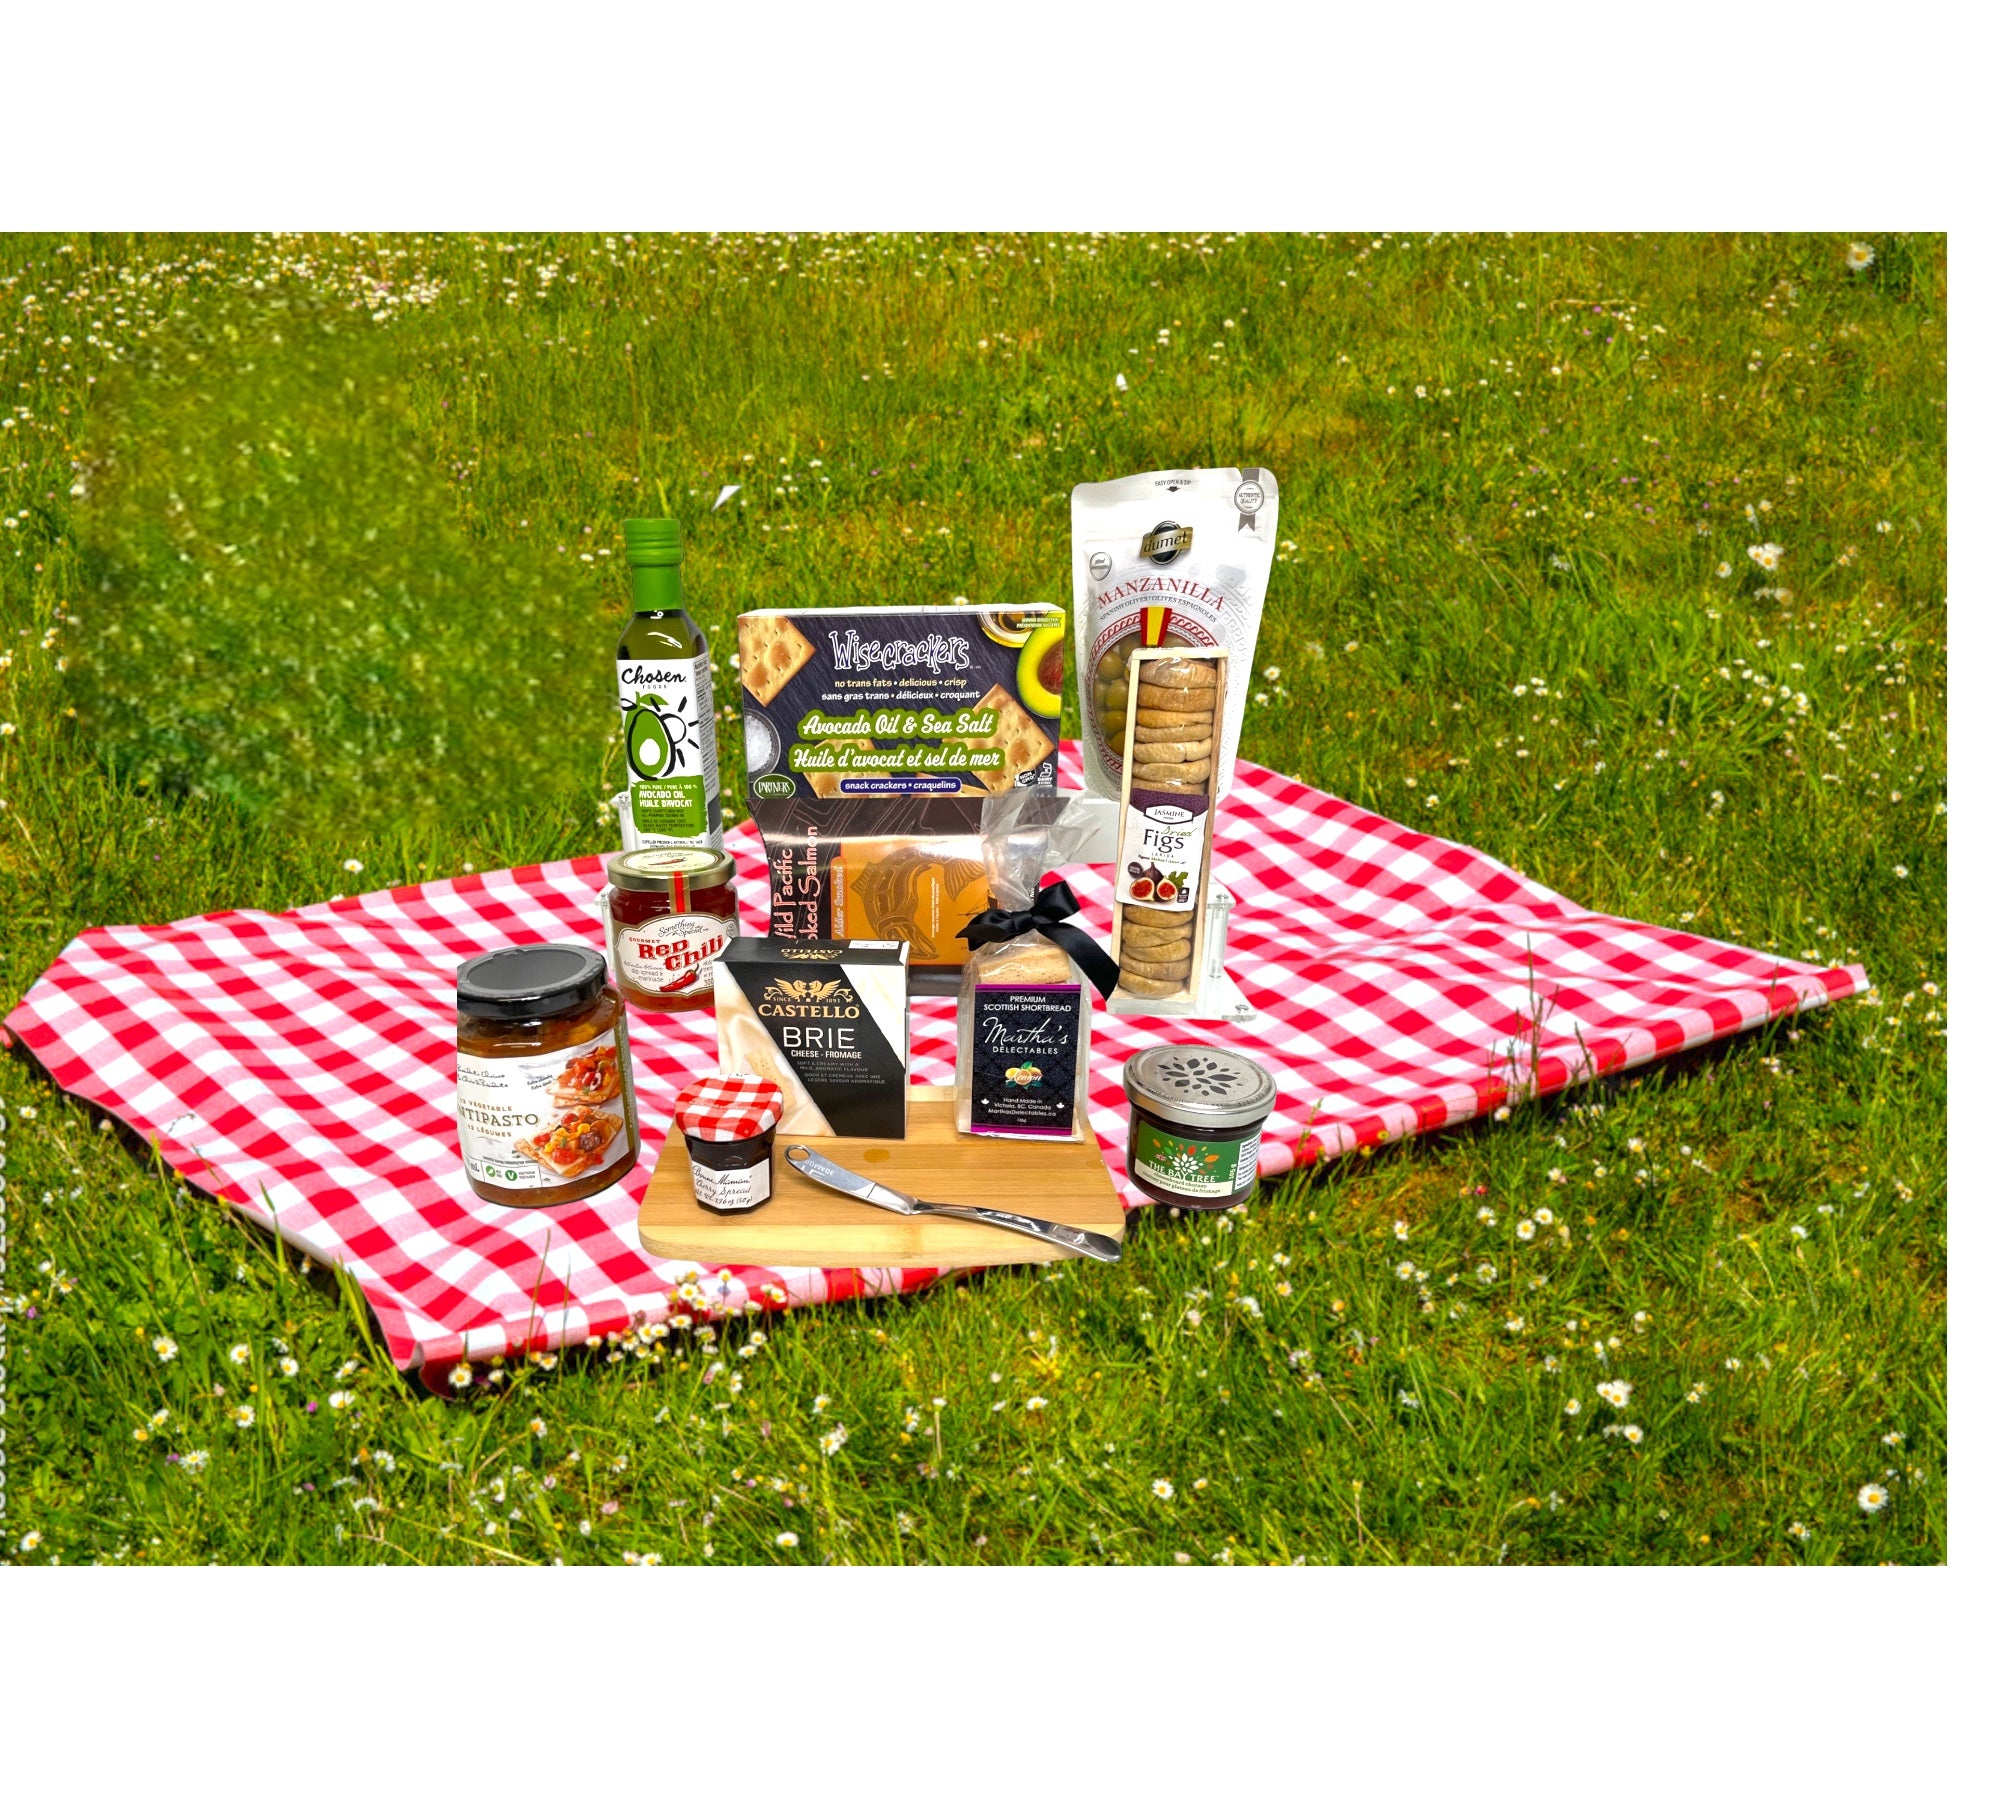 Enjoy a Delicious Picnic Spread with Our Charcuterie Basket